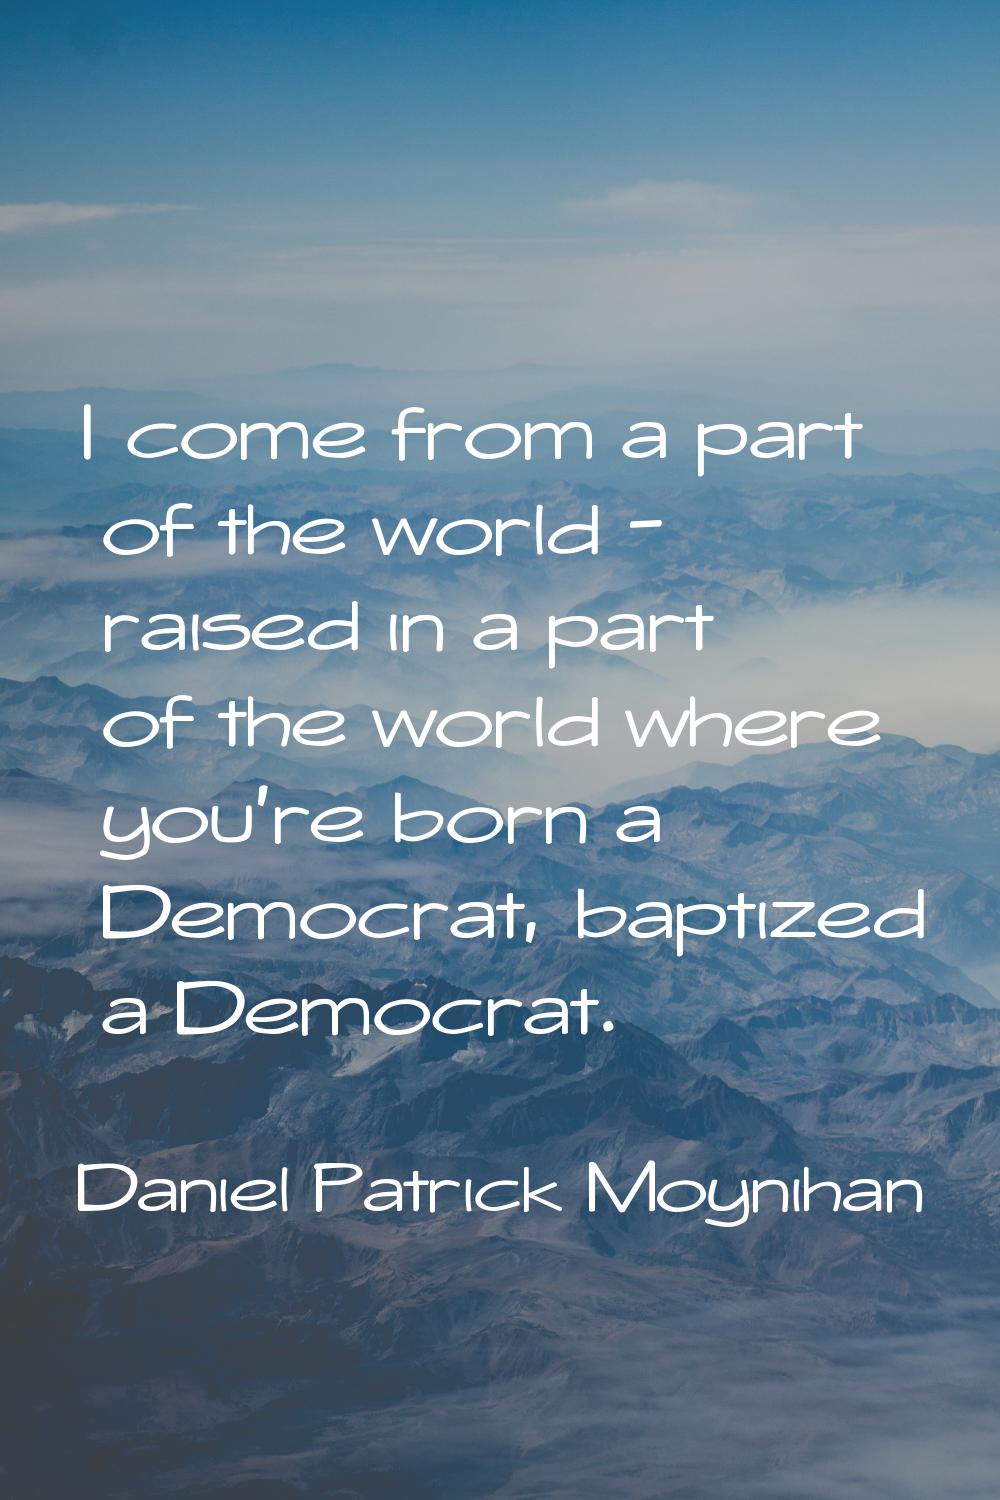 I come from a part of the world - raised in a part of the world where you're born a Democrat, bapti